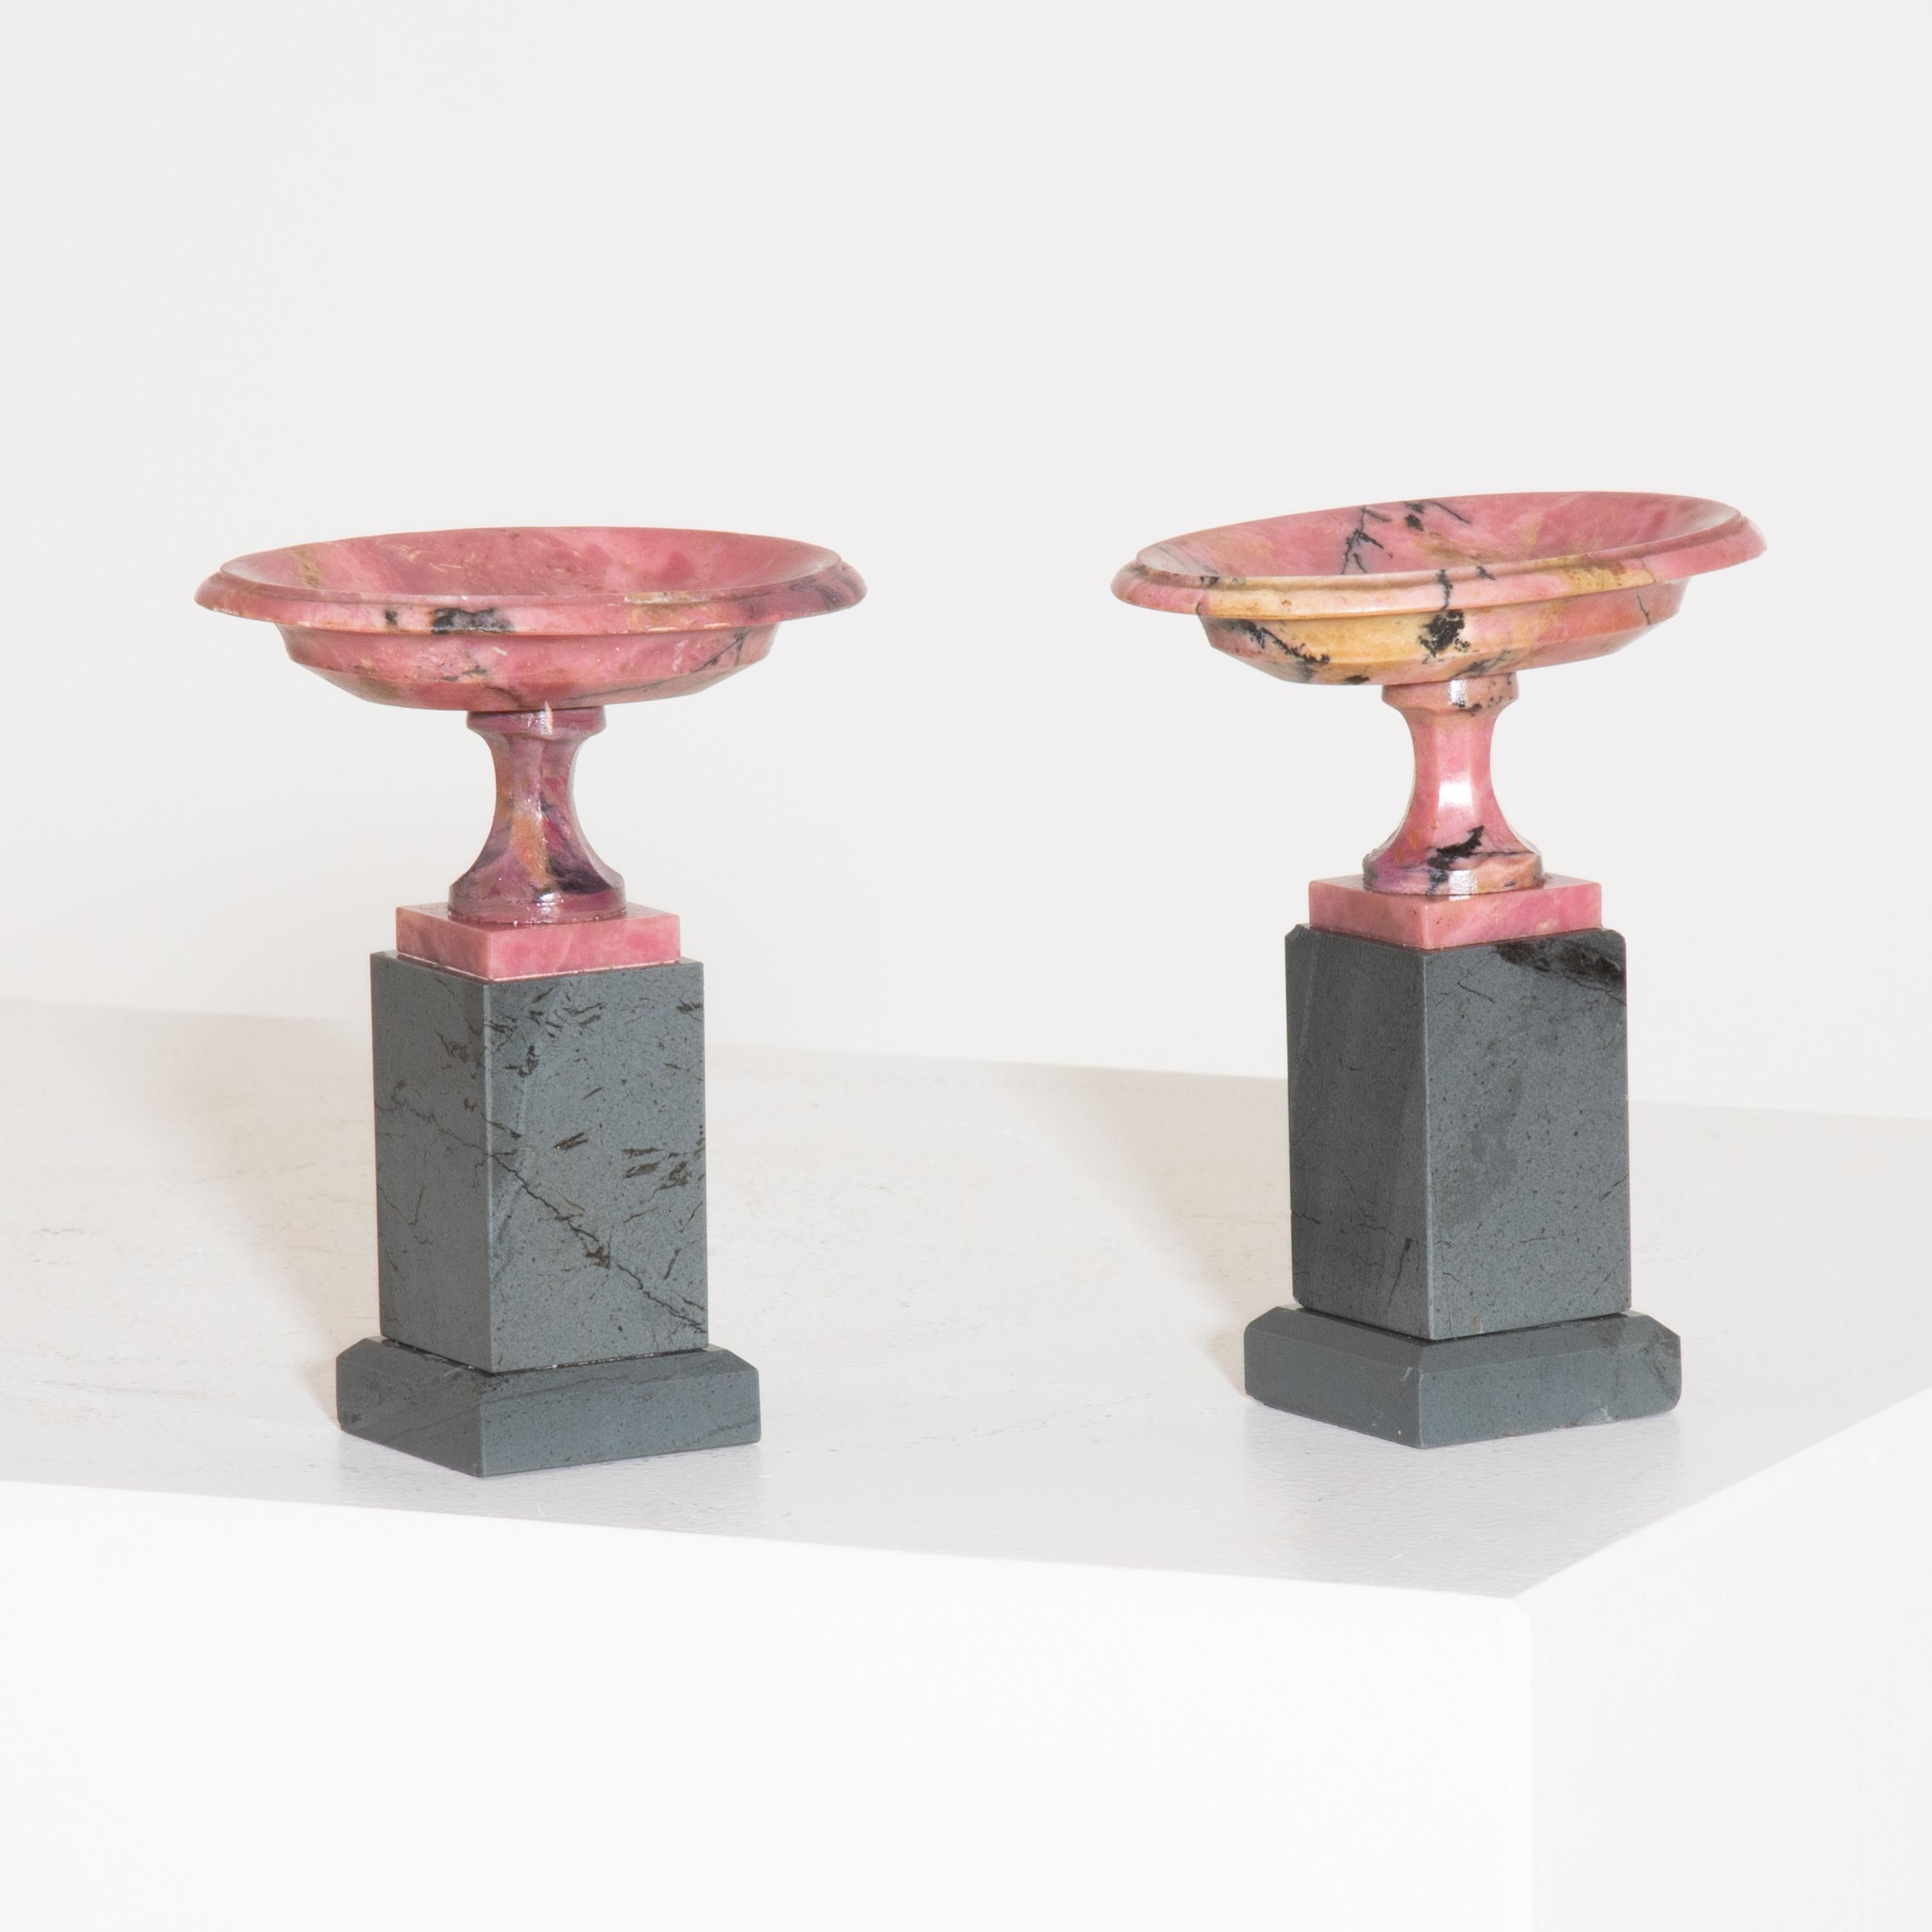 Pair of Russian tazzas on rectangular black stone bases, slender faceted shafts of Kalgan jasper and oval bowls of rhodonite. Provenance: Ex collection PETOCHI, Rome (jeweller), one vase foot restored. Literature with comparative object: C. Coleman